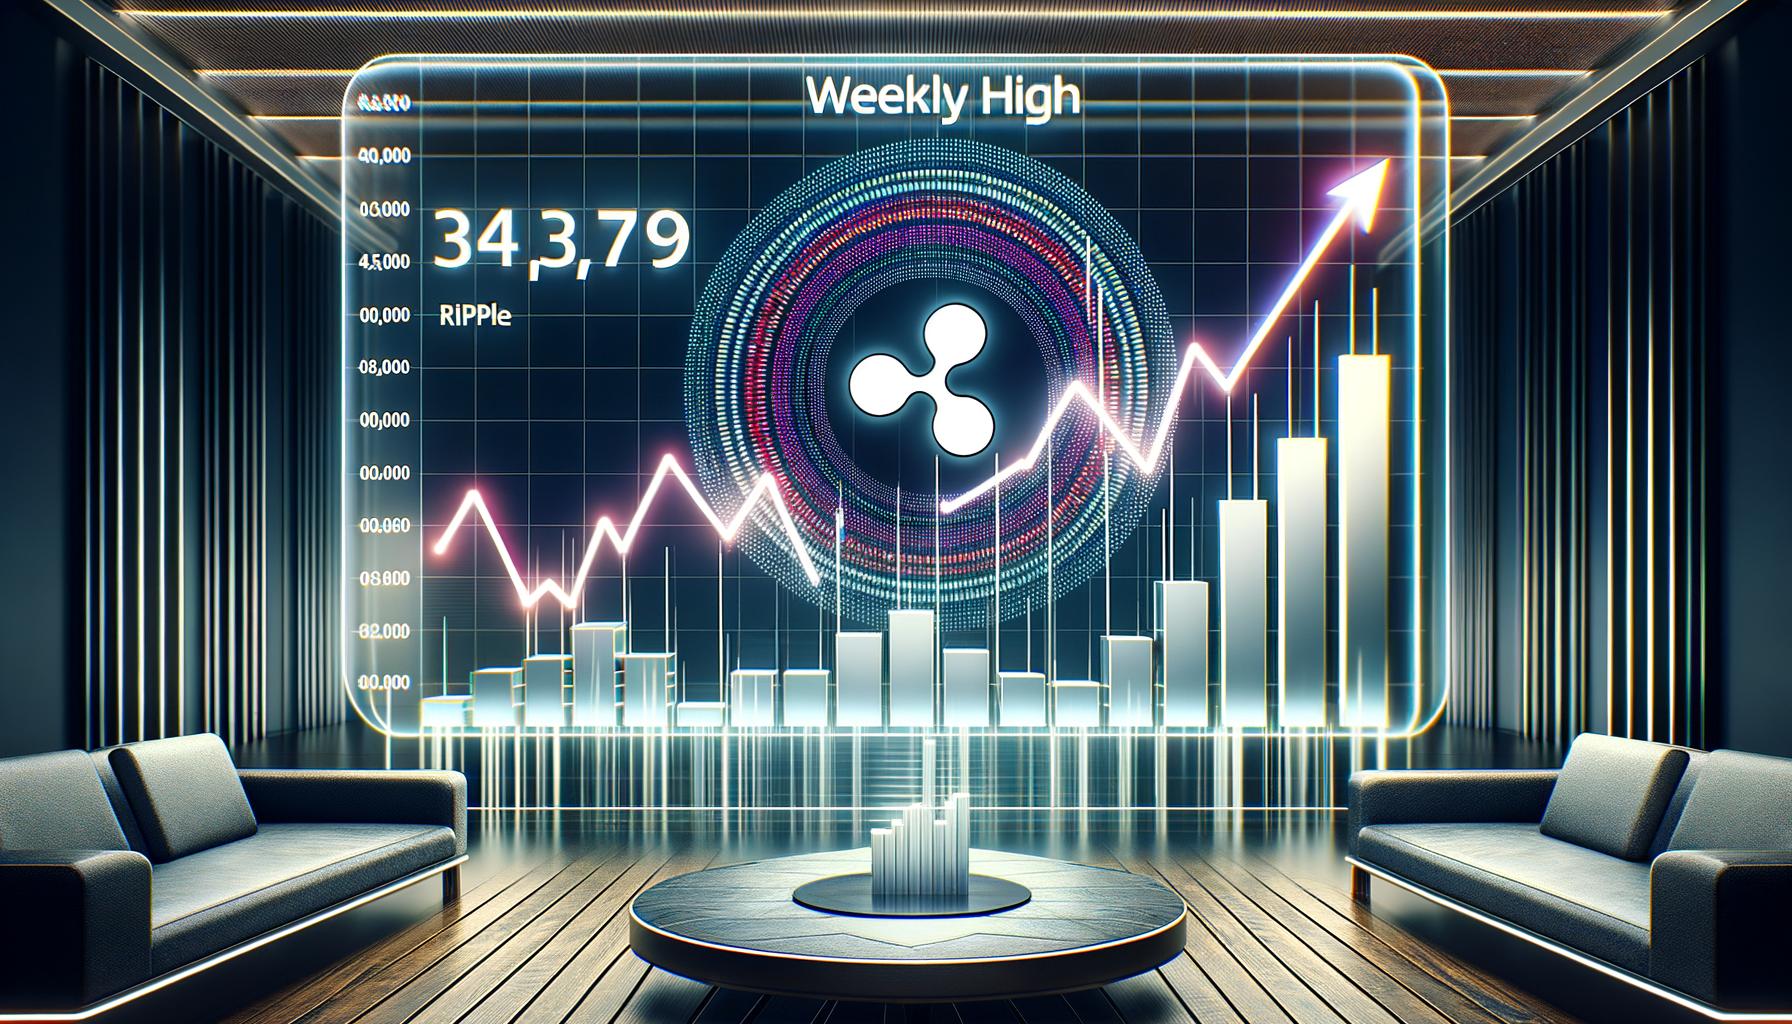 XRP Price Hints at Weekly High: Are Bears Ready to Take Over?